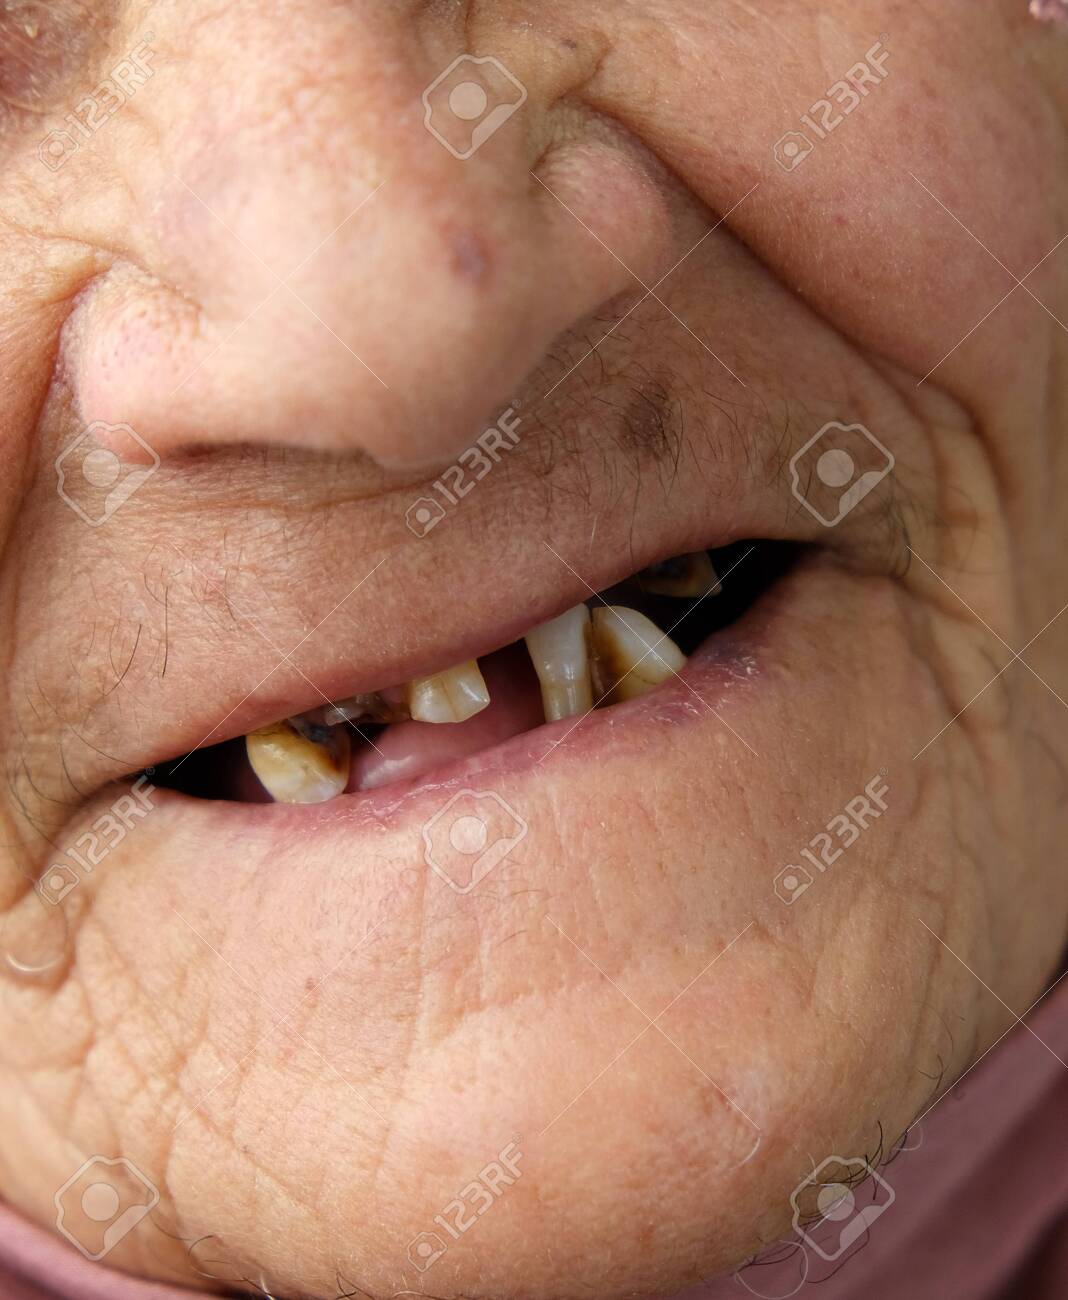 cecille glorioso recommends No Teeth Old Lady